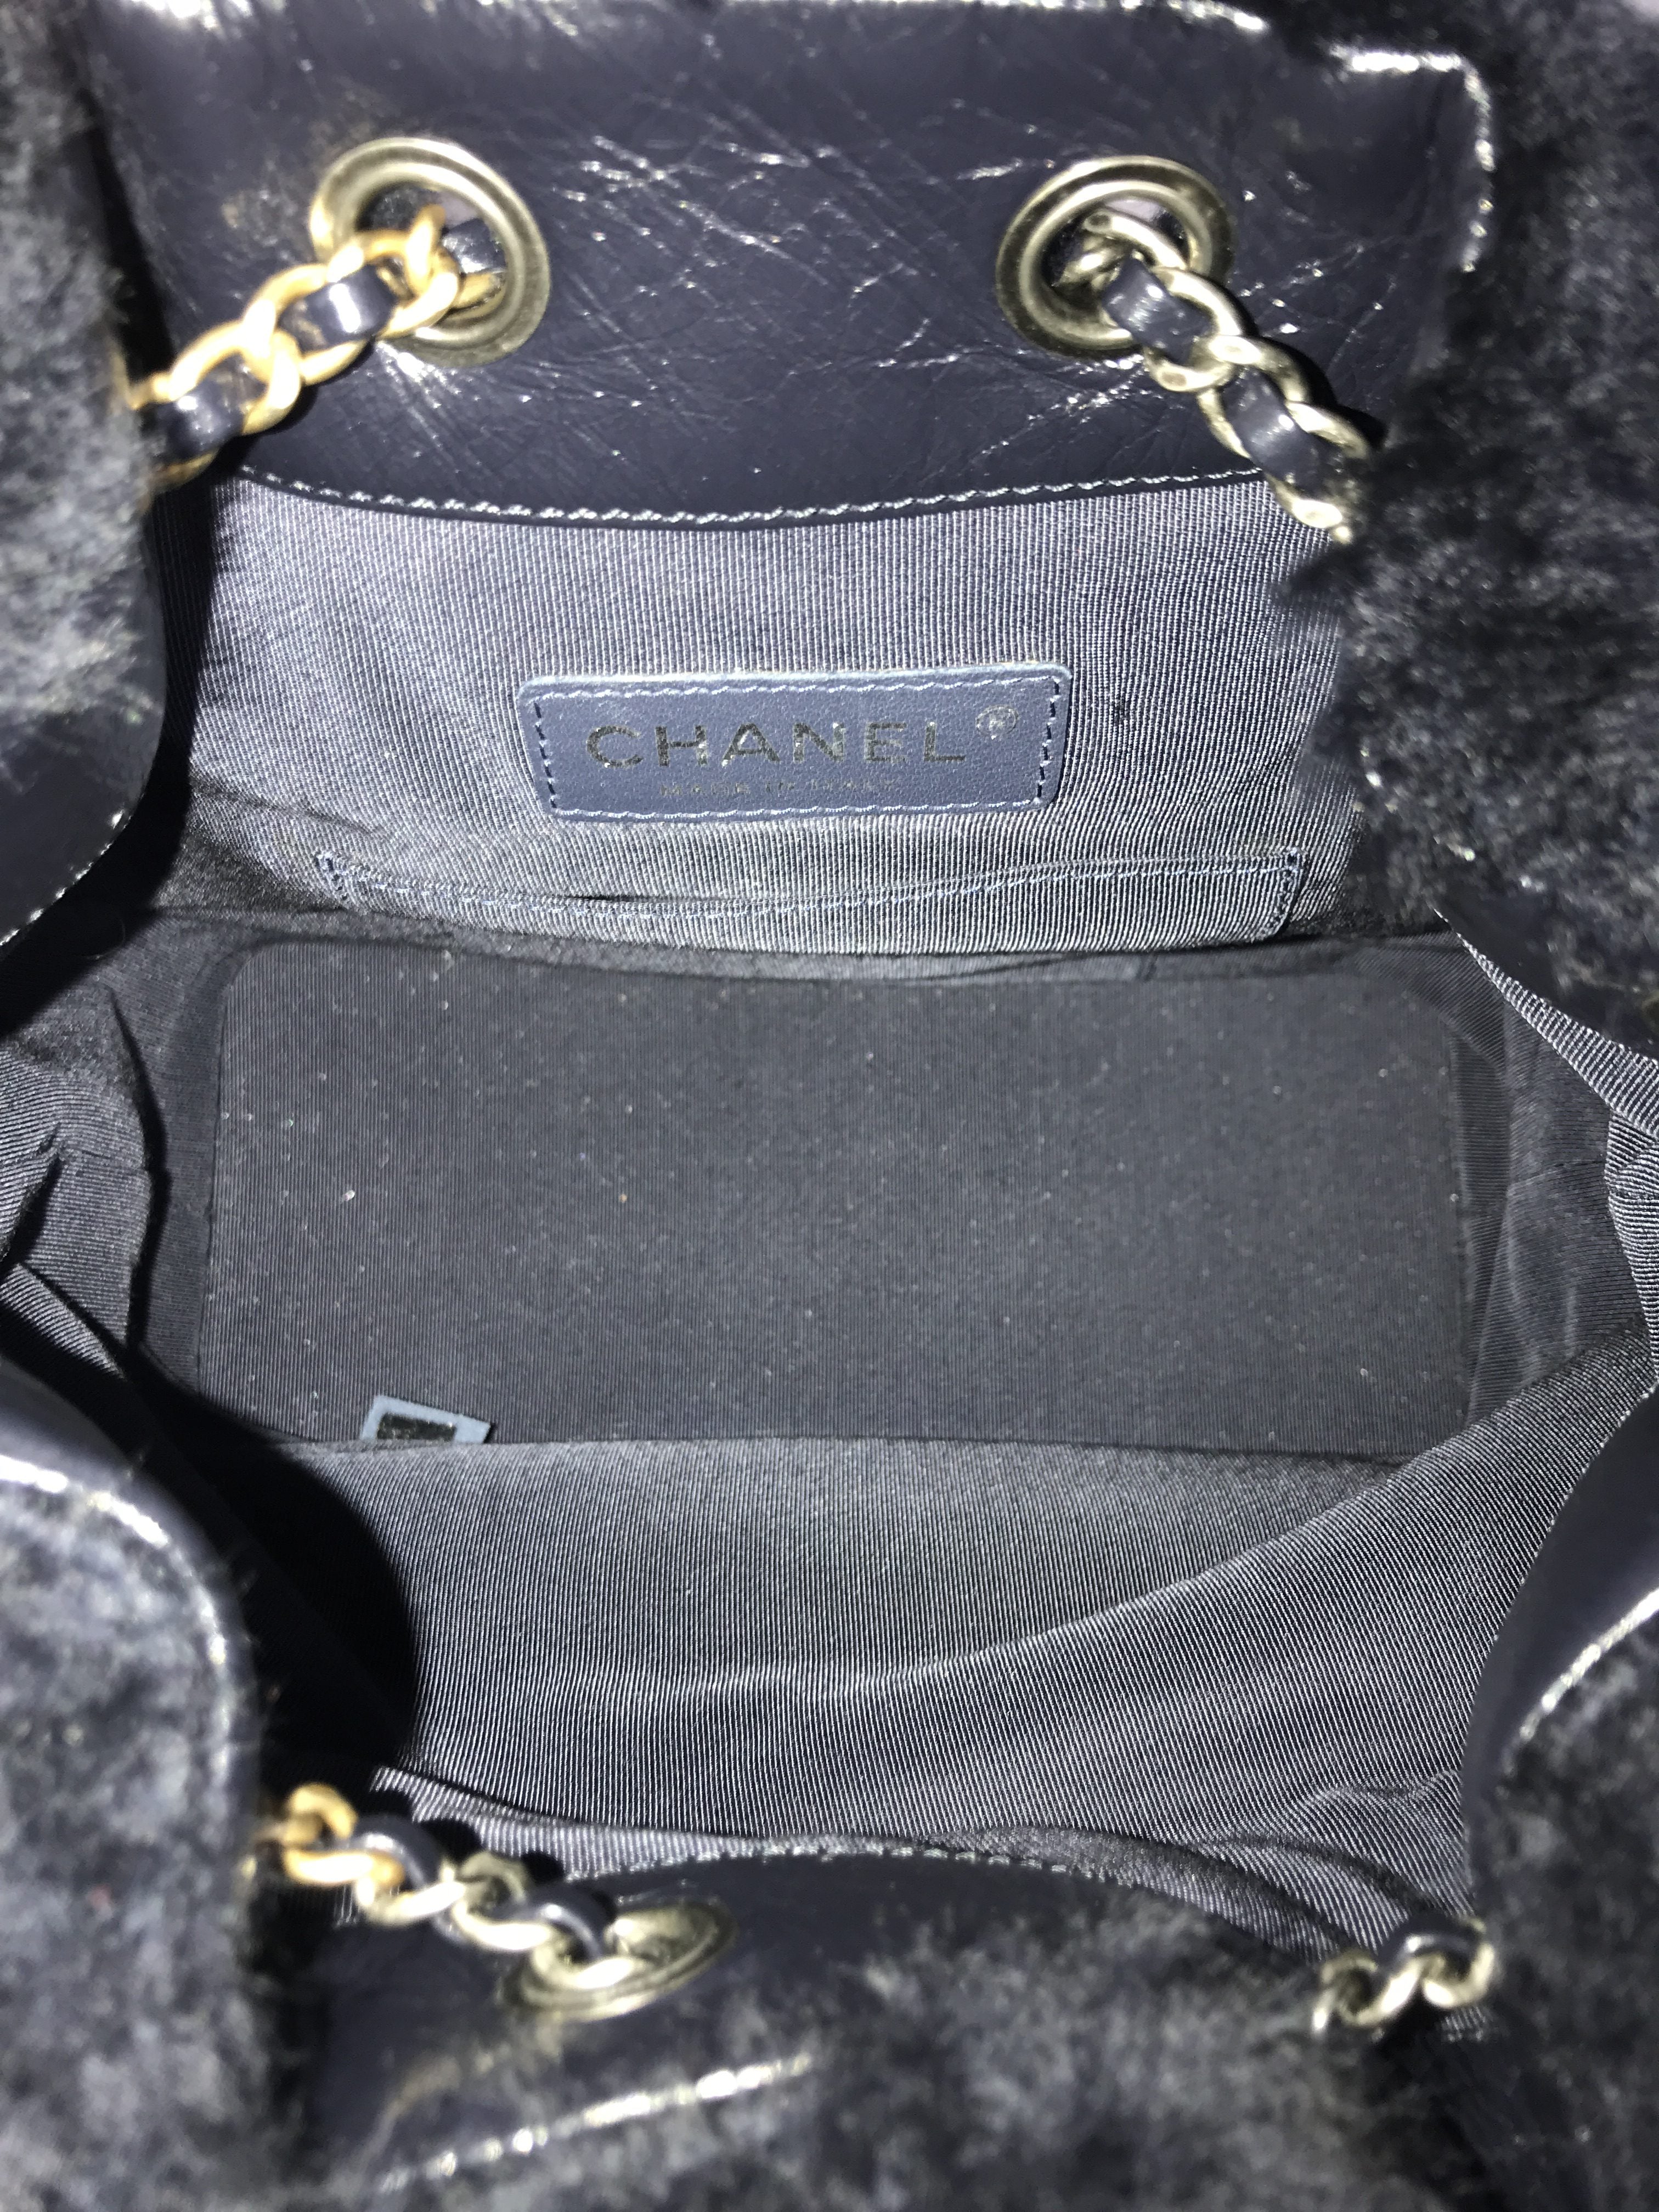 Chanel Navy Shearling/ Aged Calfskin Leather Gabrielle Backpack w/ AGHW/RHW/GHW